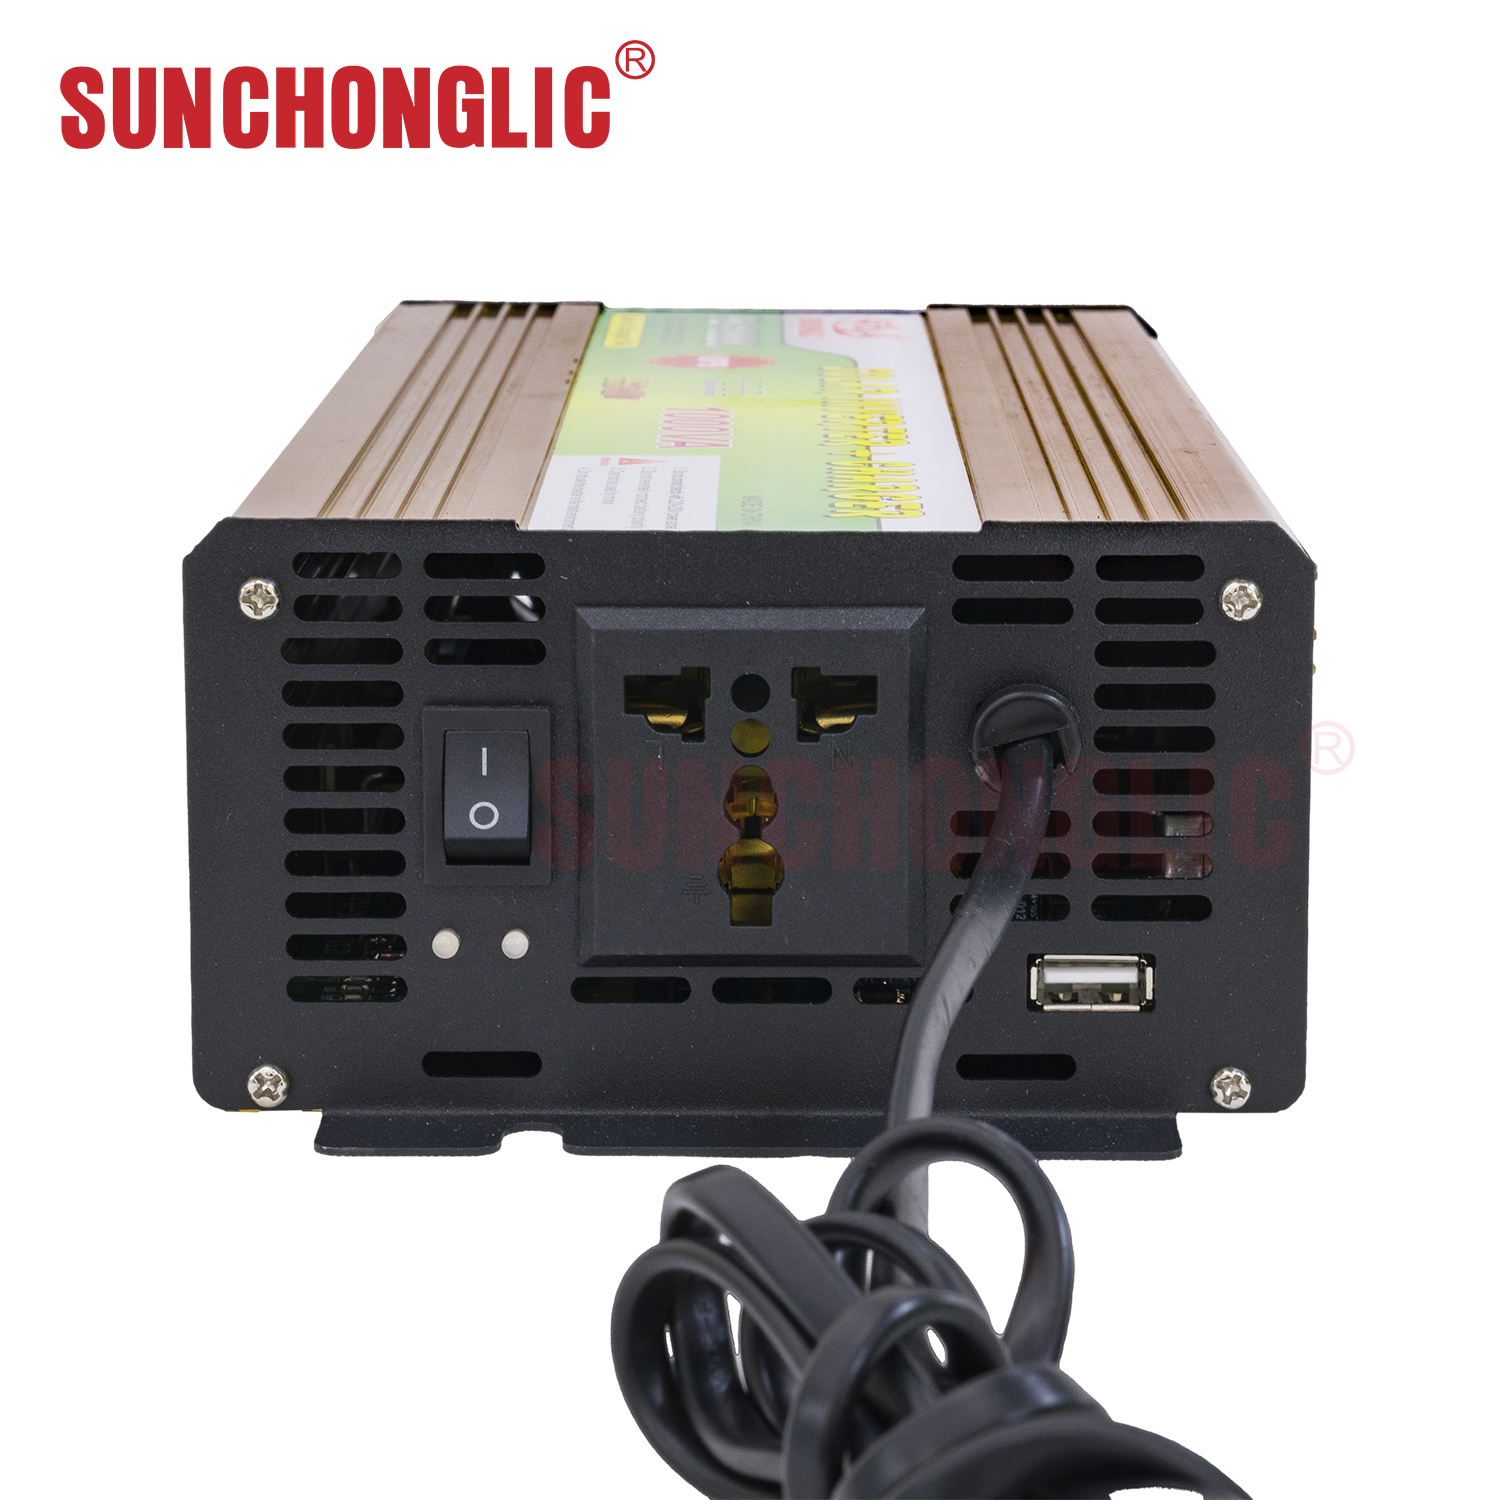 UPS Modified Sine Wave Power Inverter Charger